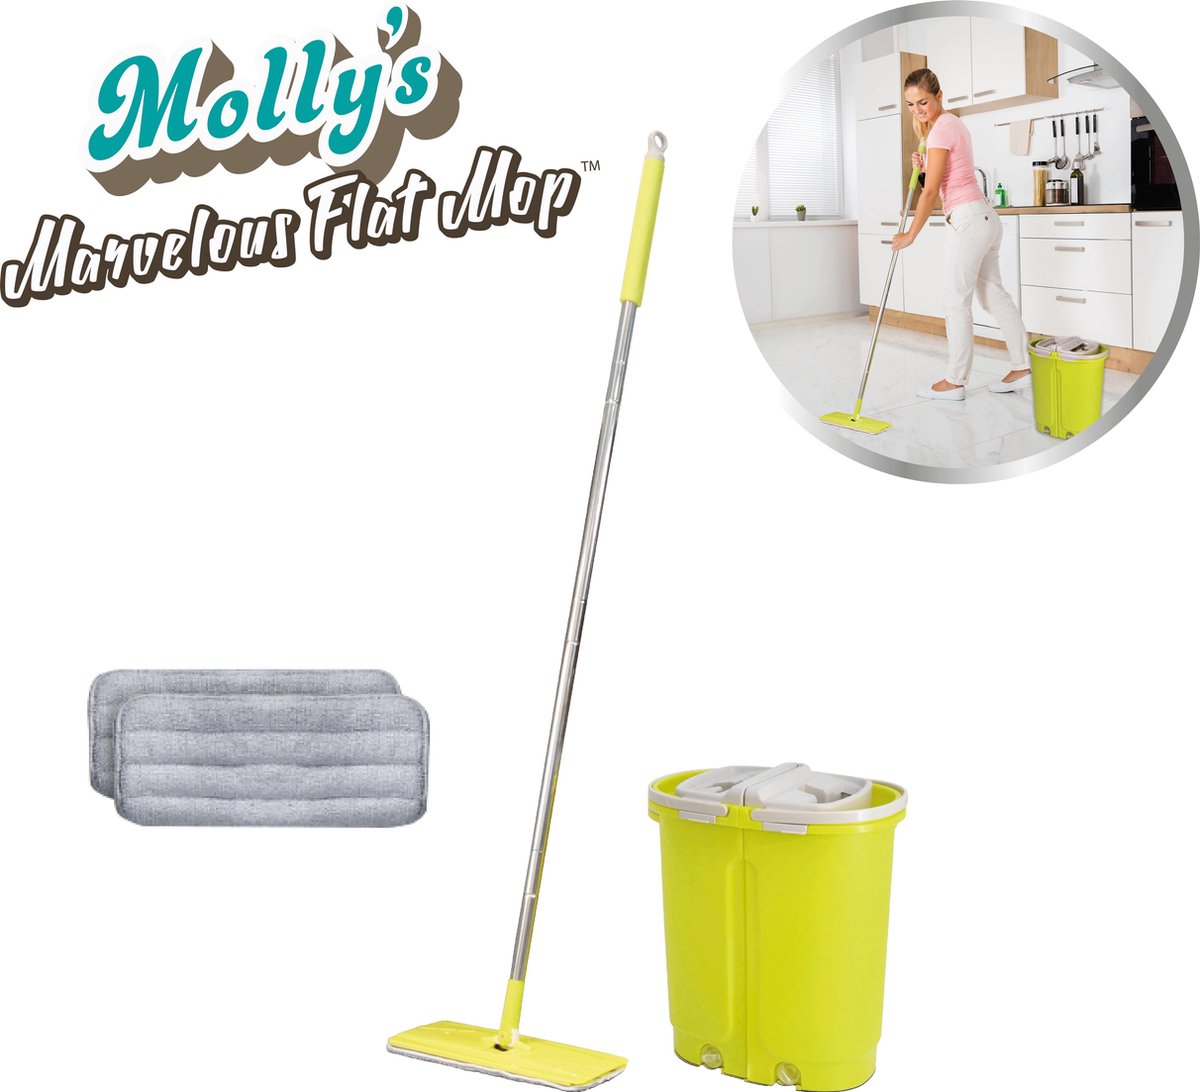 Mollys Molly's Marvelous Flat Mop - Cleaning Device - Groen